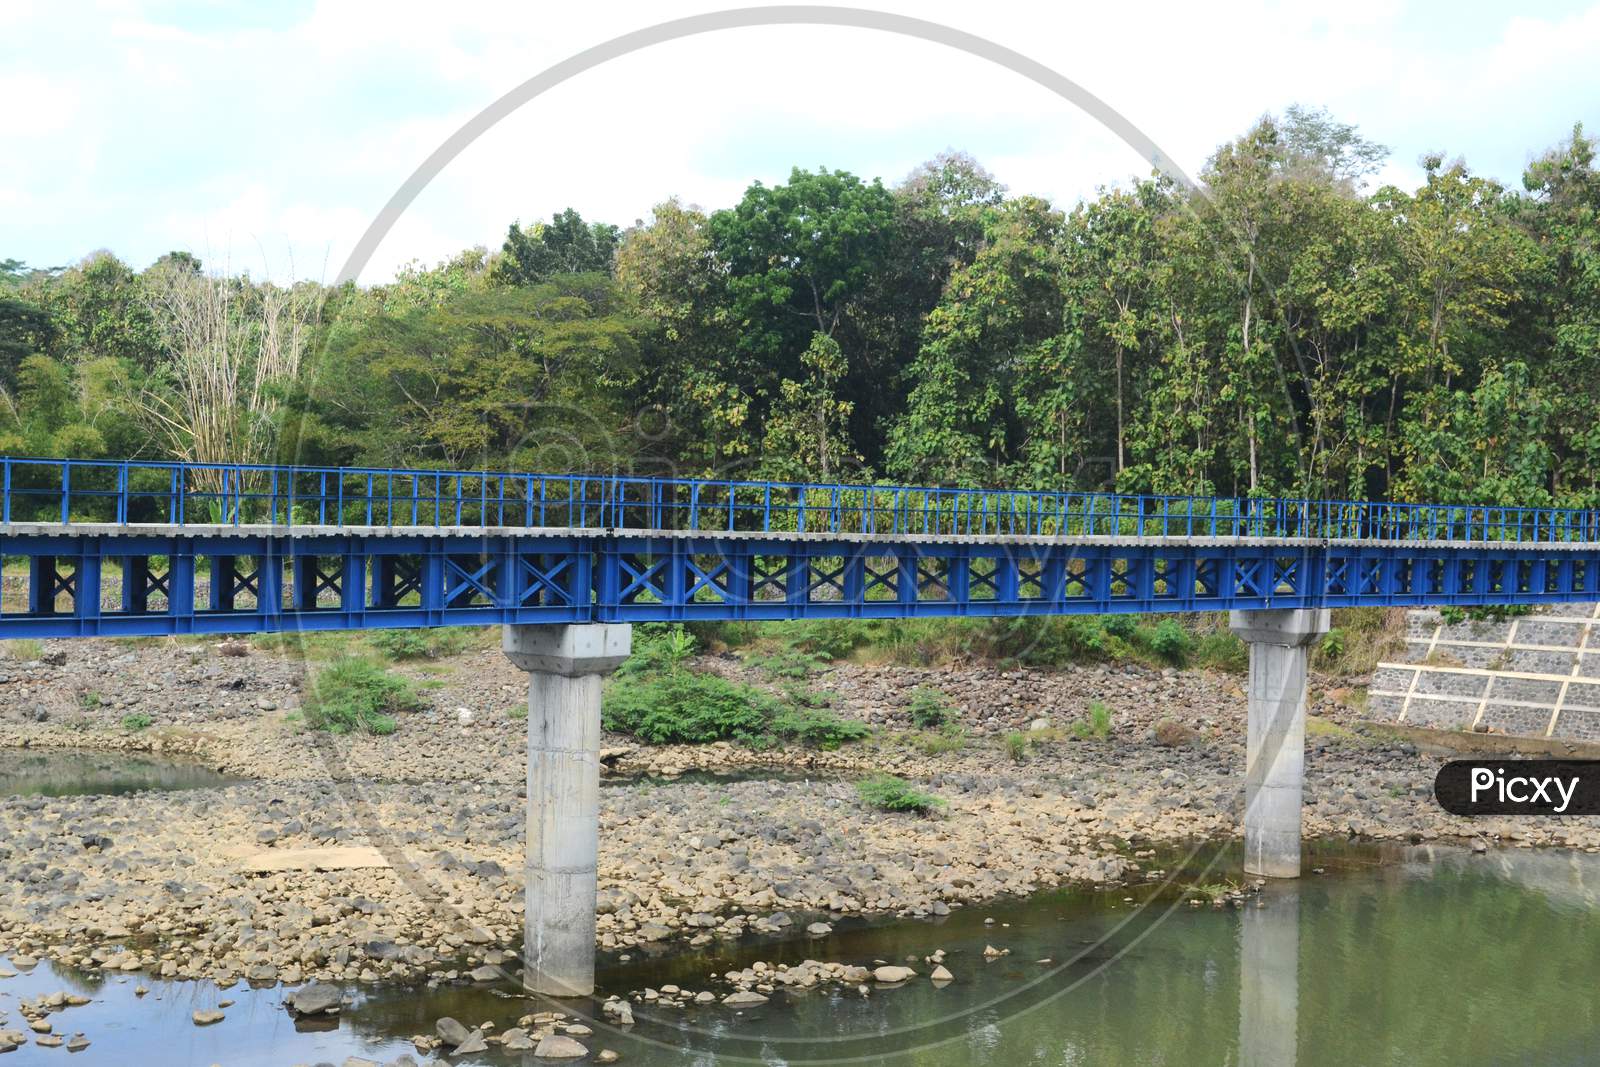 Long Blue Iron Bridge With Two Pillars On The River